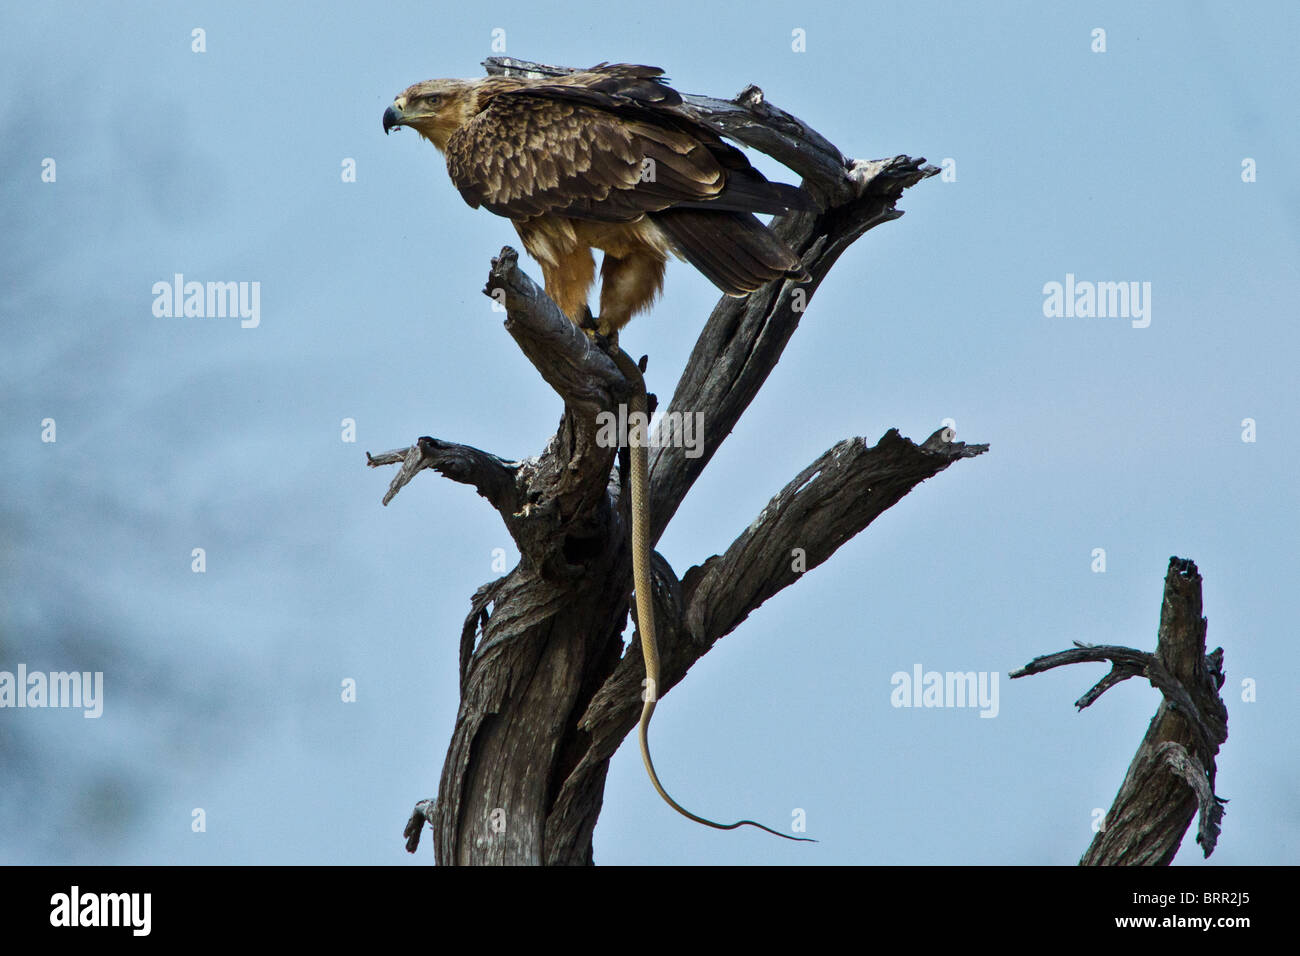 The tawny eagle had caught the snake shortly before we arrived on the scene: the snake was still wriggling. Stock Photo